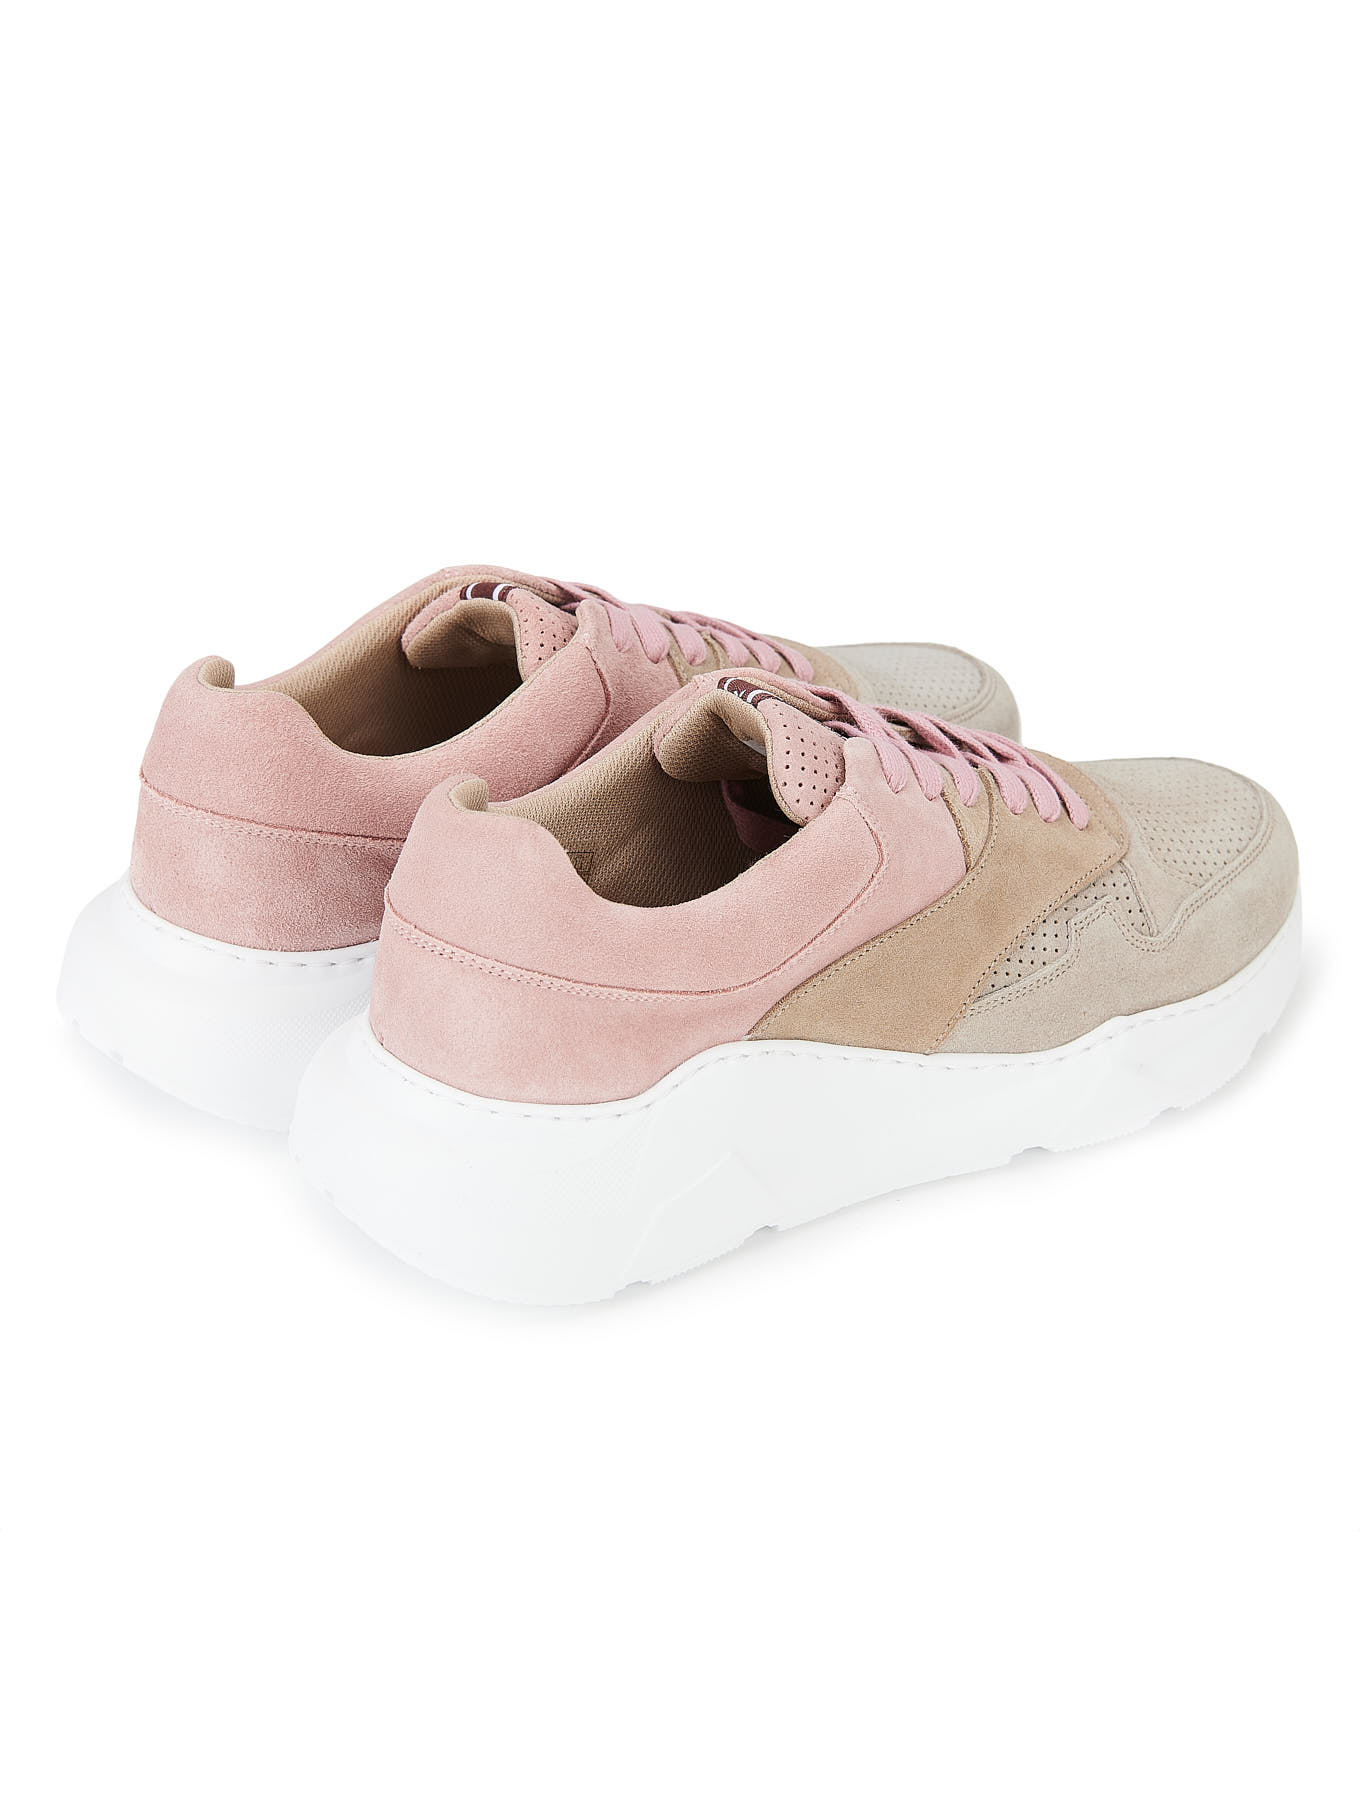 Tenis Rosa Pálido Casual Mulher